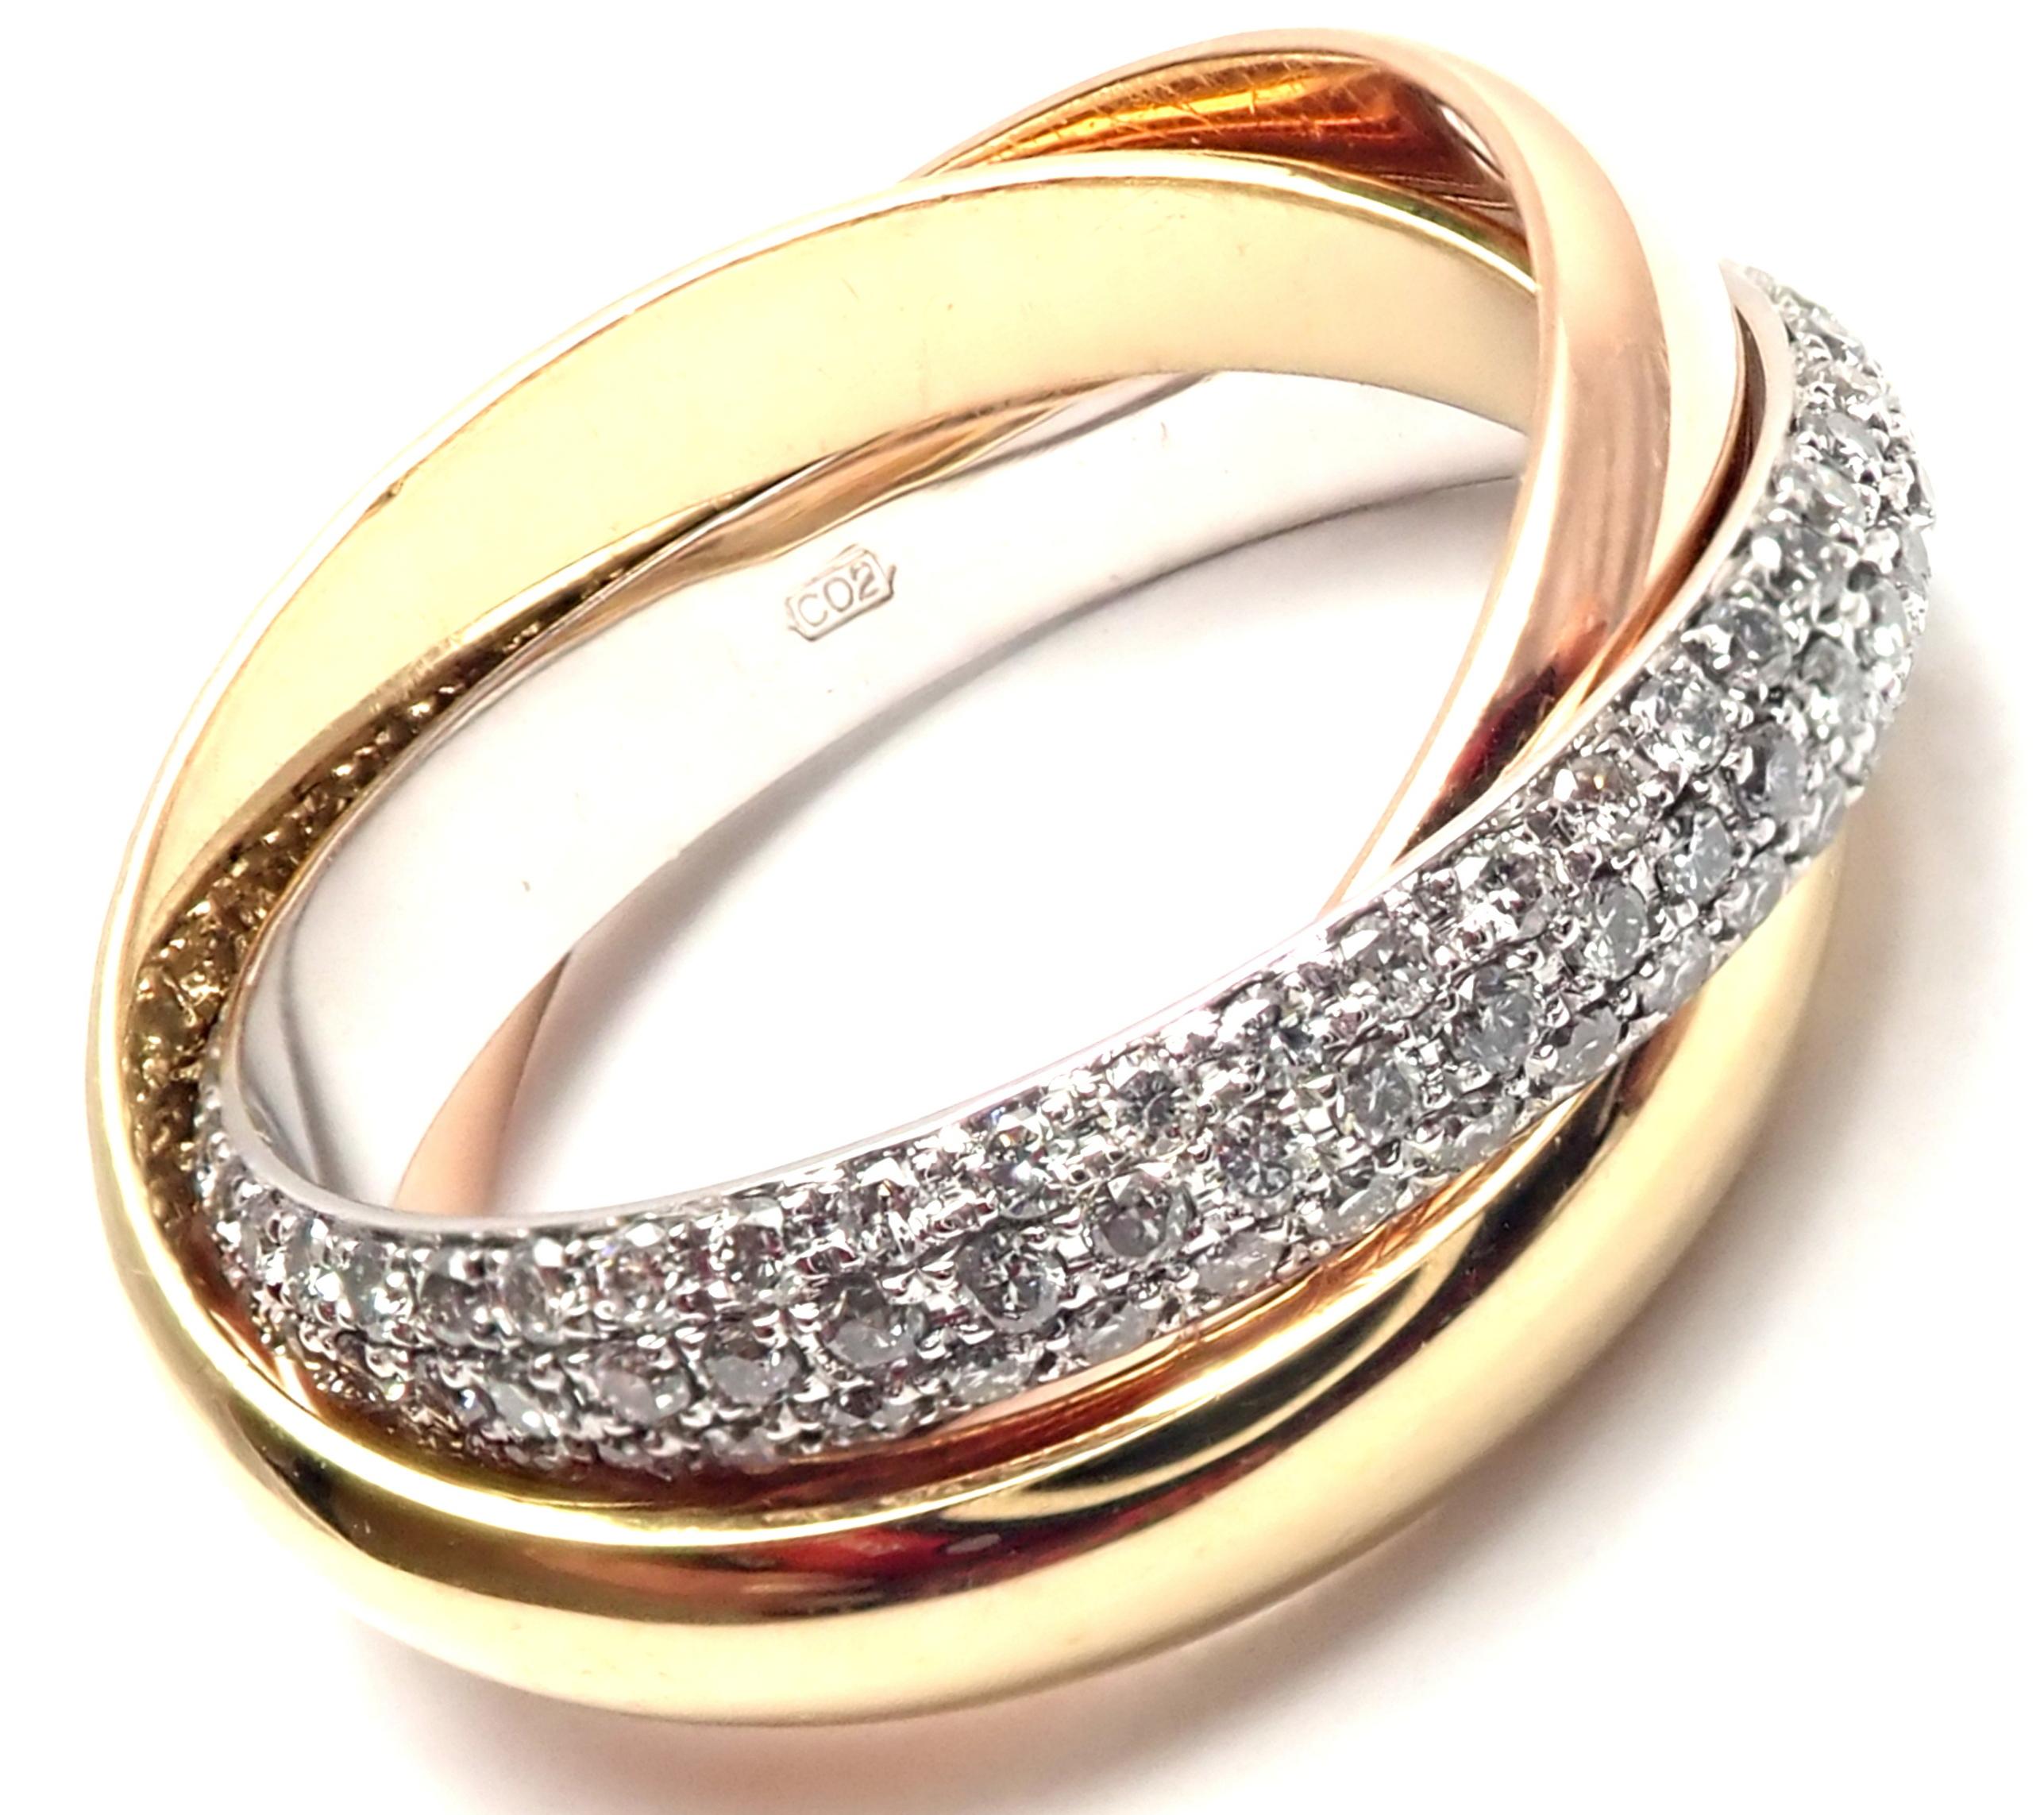 18k Tri-Color Gold Diamond Classic Trinity Band Ring by Cartier.
With Round Brilliant cut diamonds VVS1 clarity, F-H color total weight approx. .90ct
This ring comes with Cartier box and Cartier service paper.
Details:
Size: European 52 US 6
Single